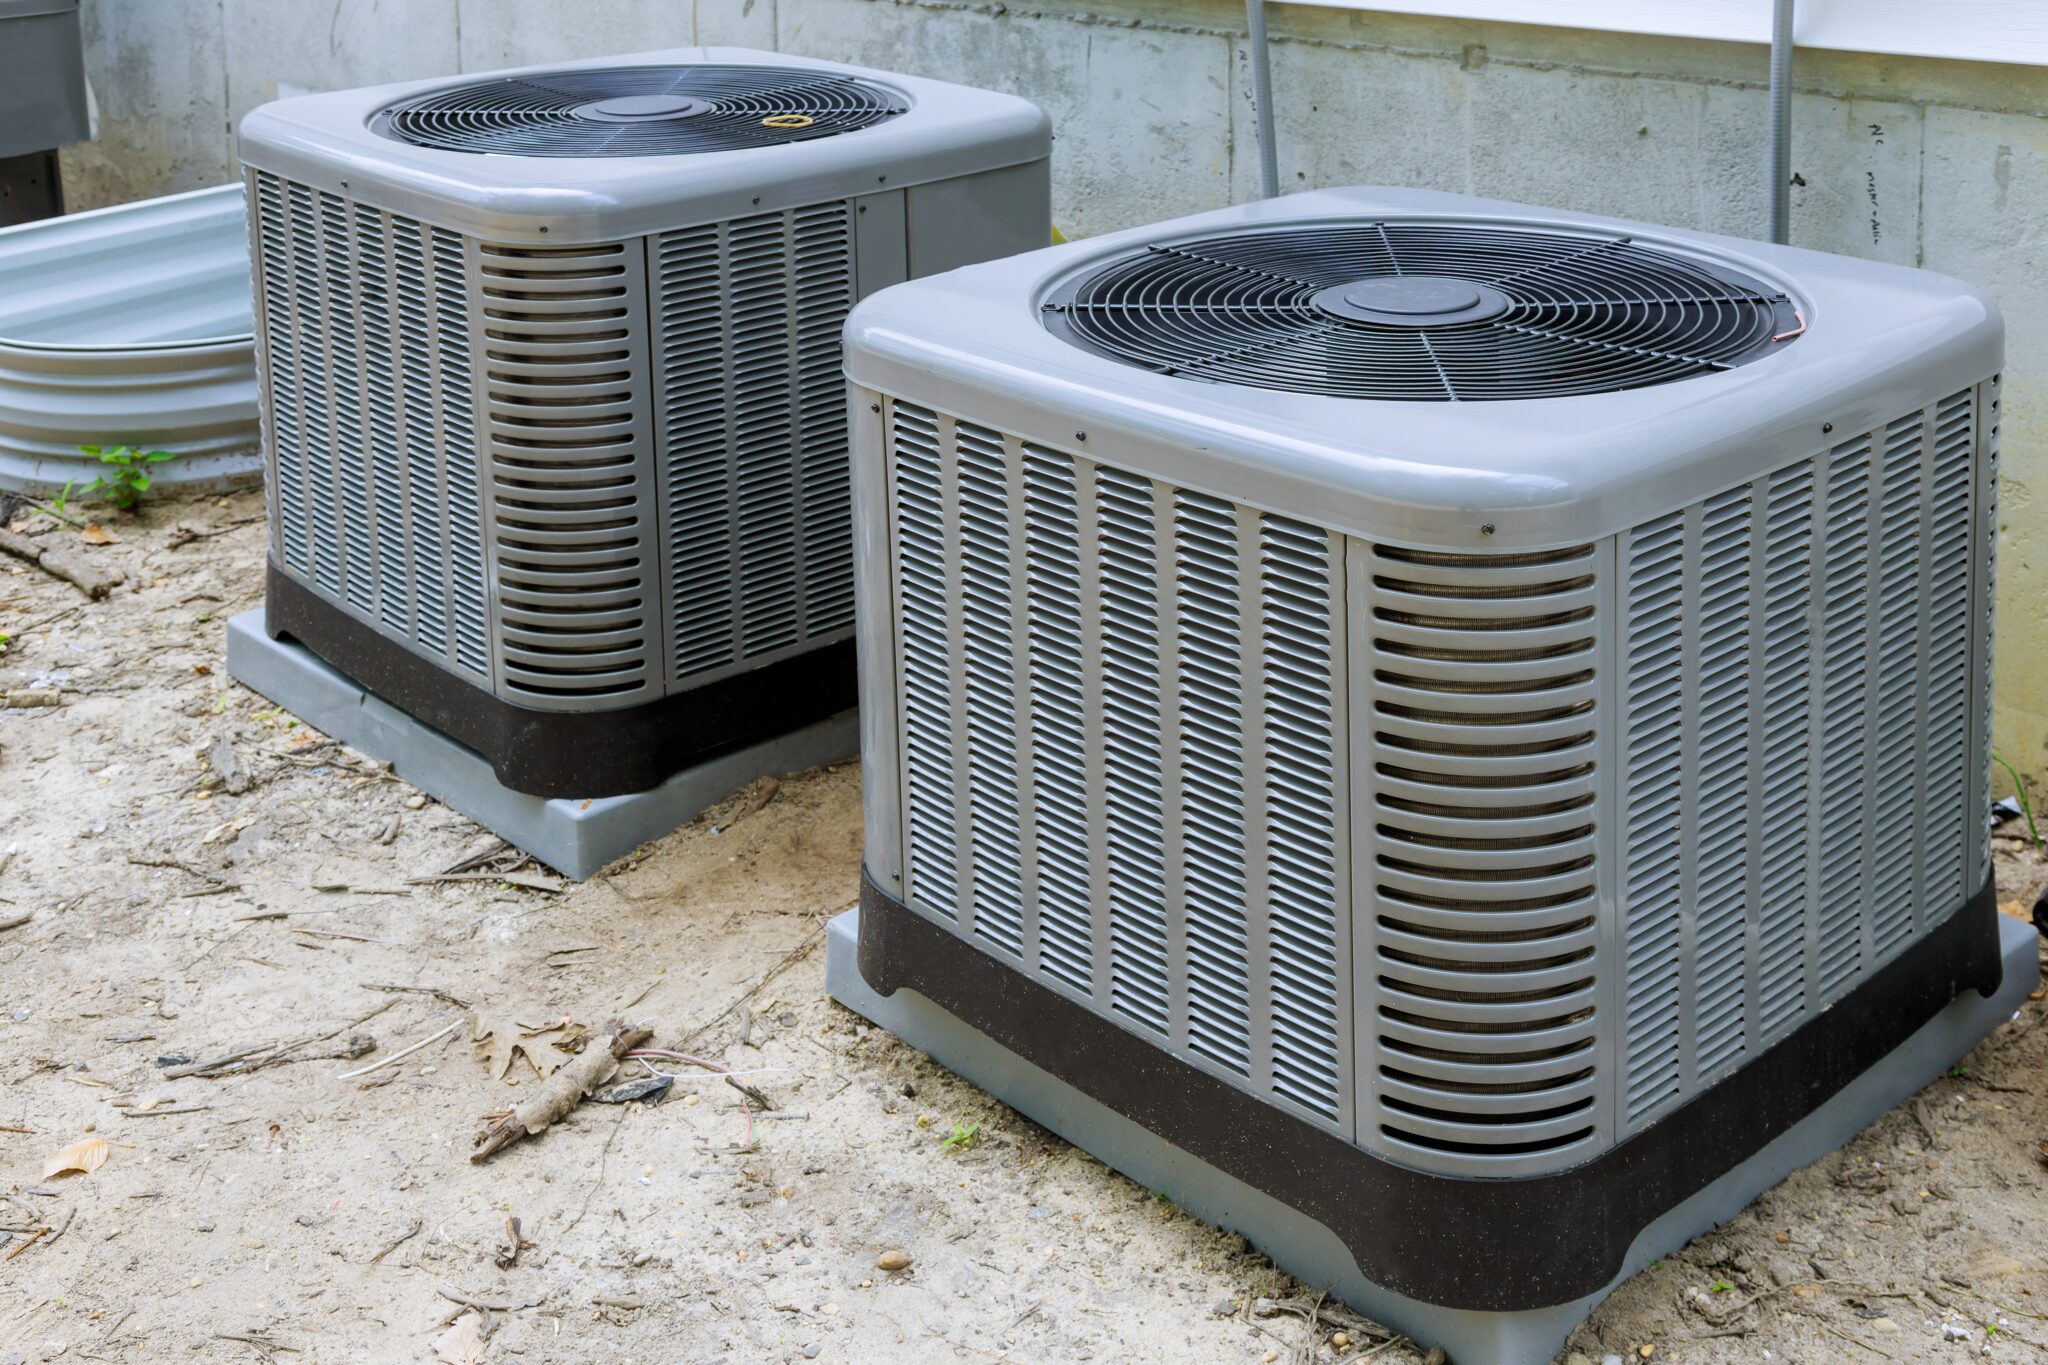 What happens when you neglect your AC system?